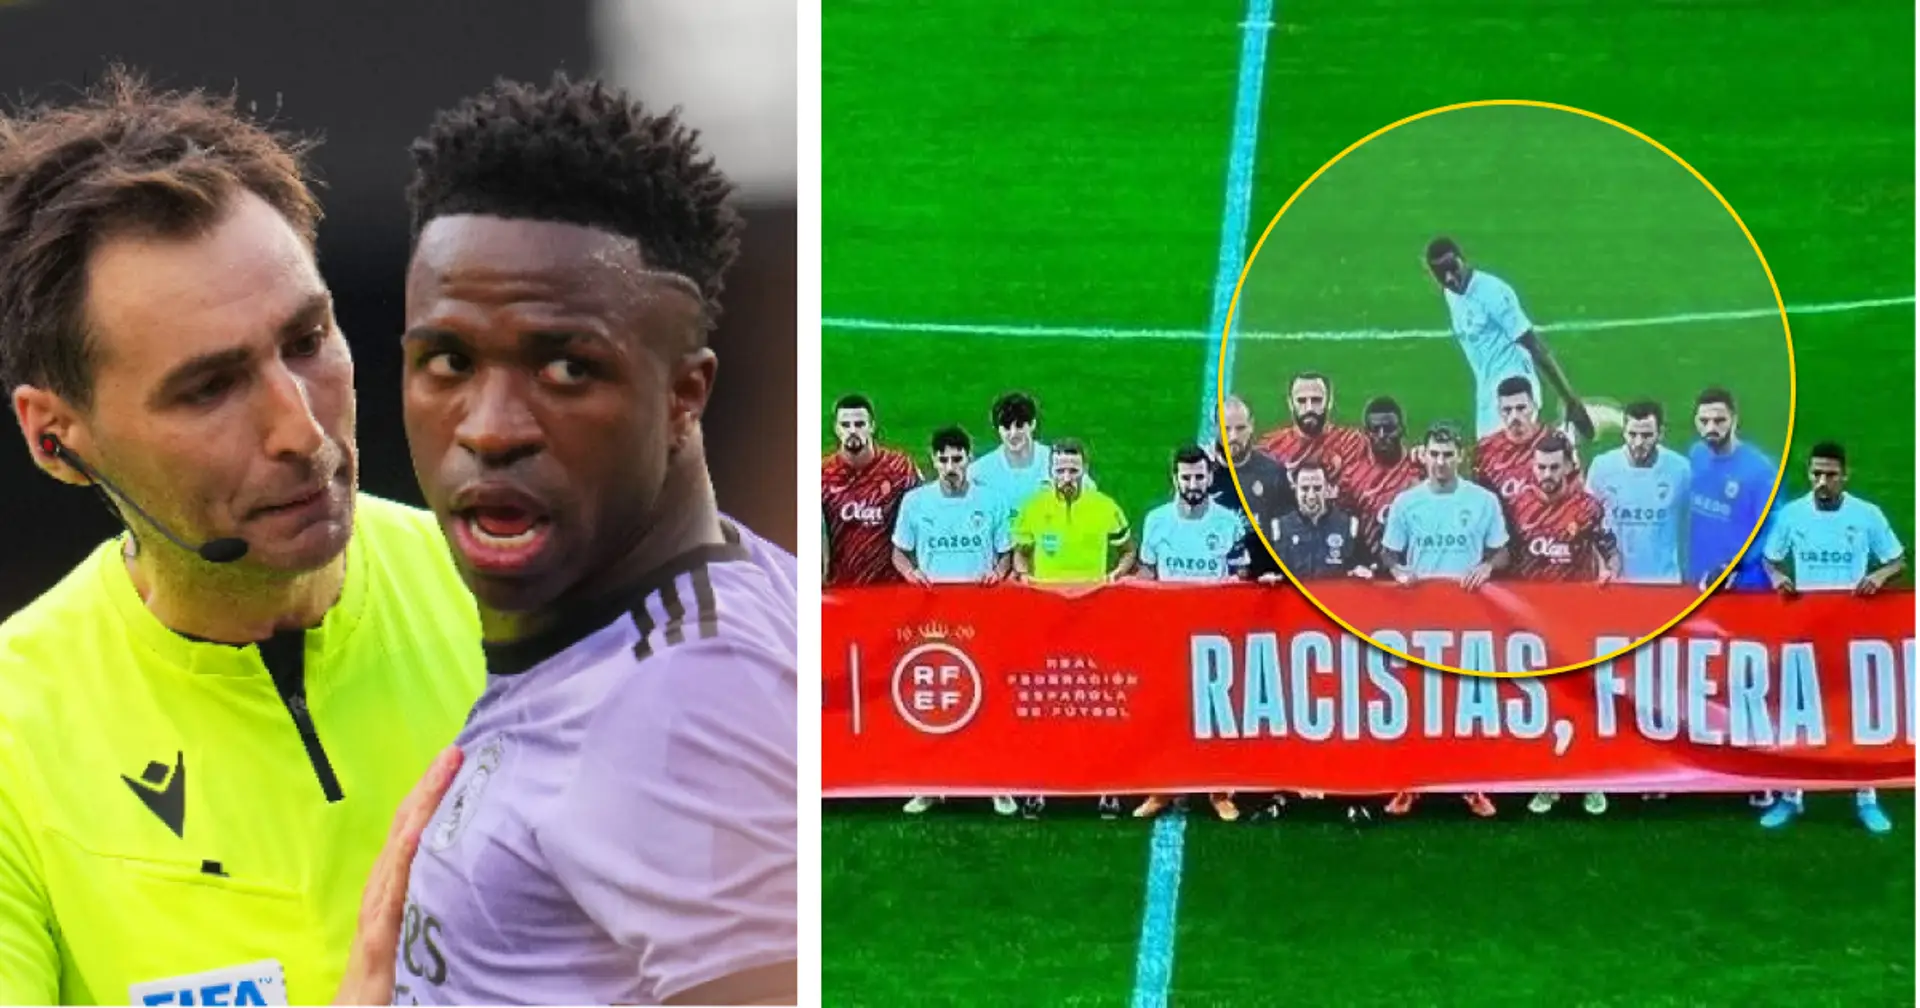 Valencia player Mouctar Diakhaby refuses to hold anti-racism banner as sign of protest to La Liga